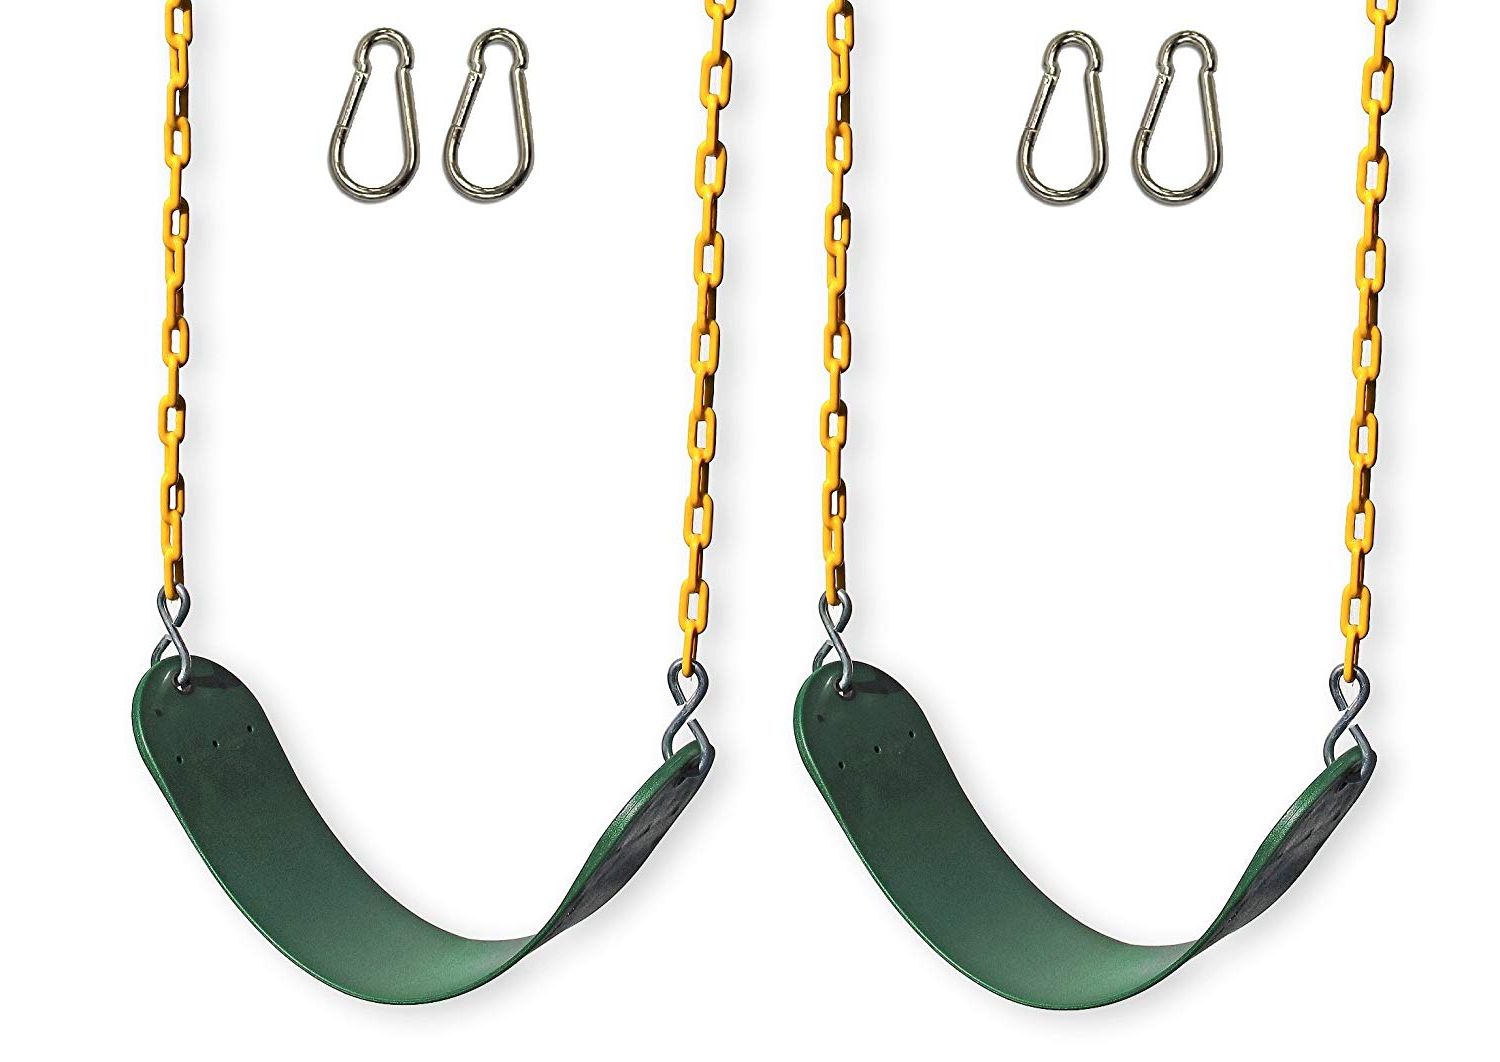 Amazon: Eastern Jungle Gym Two Heavy Duty Replacement With Regard To Well Liked Swing Seats With Chains (Photo 4 of 30)